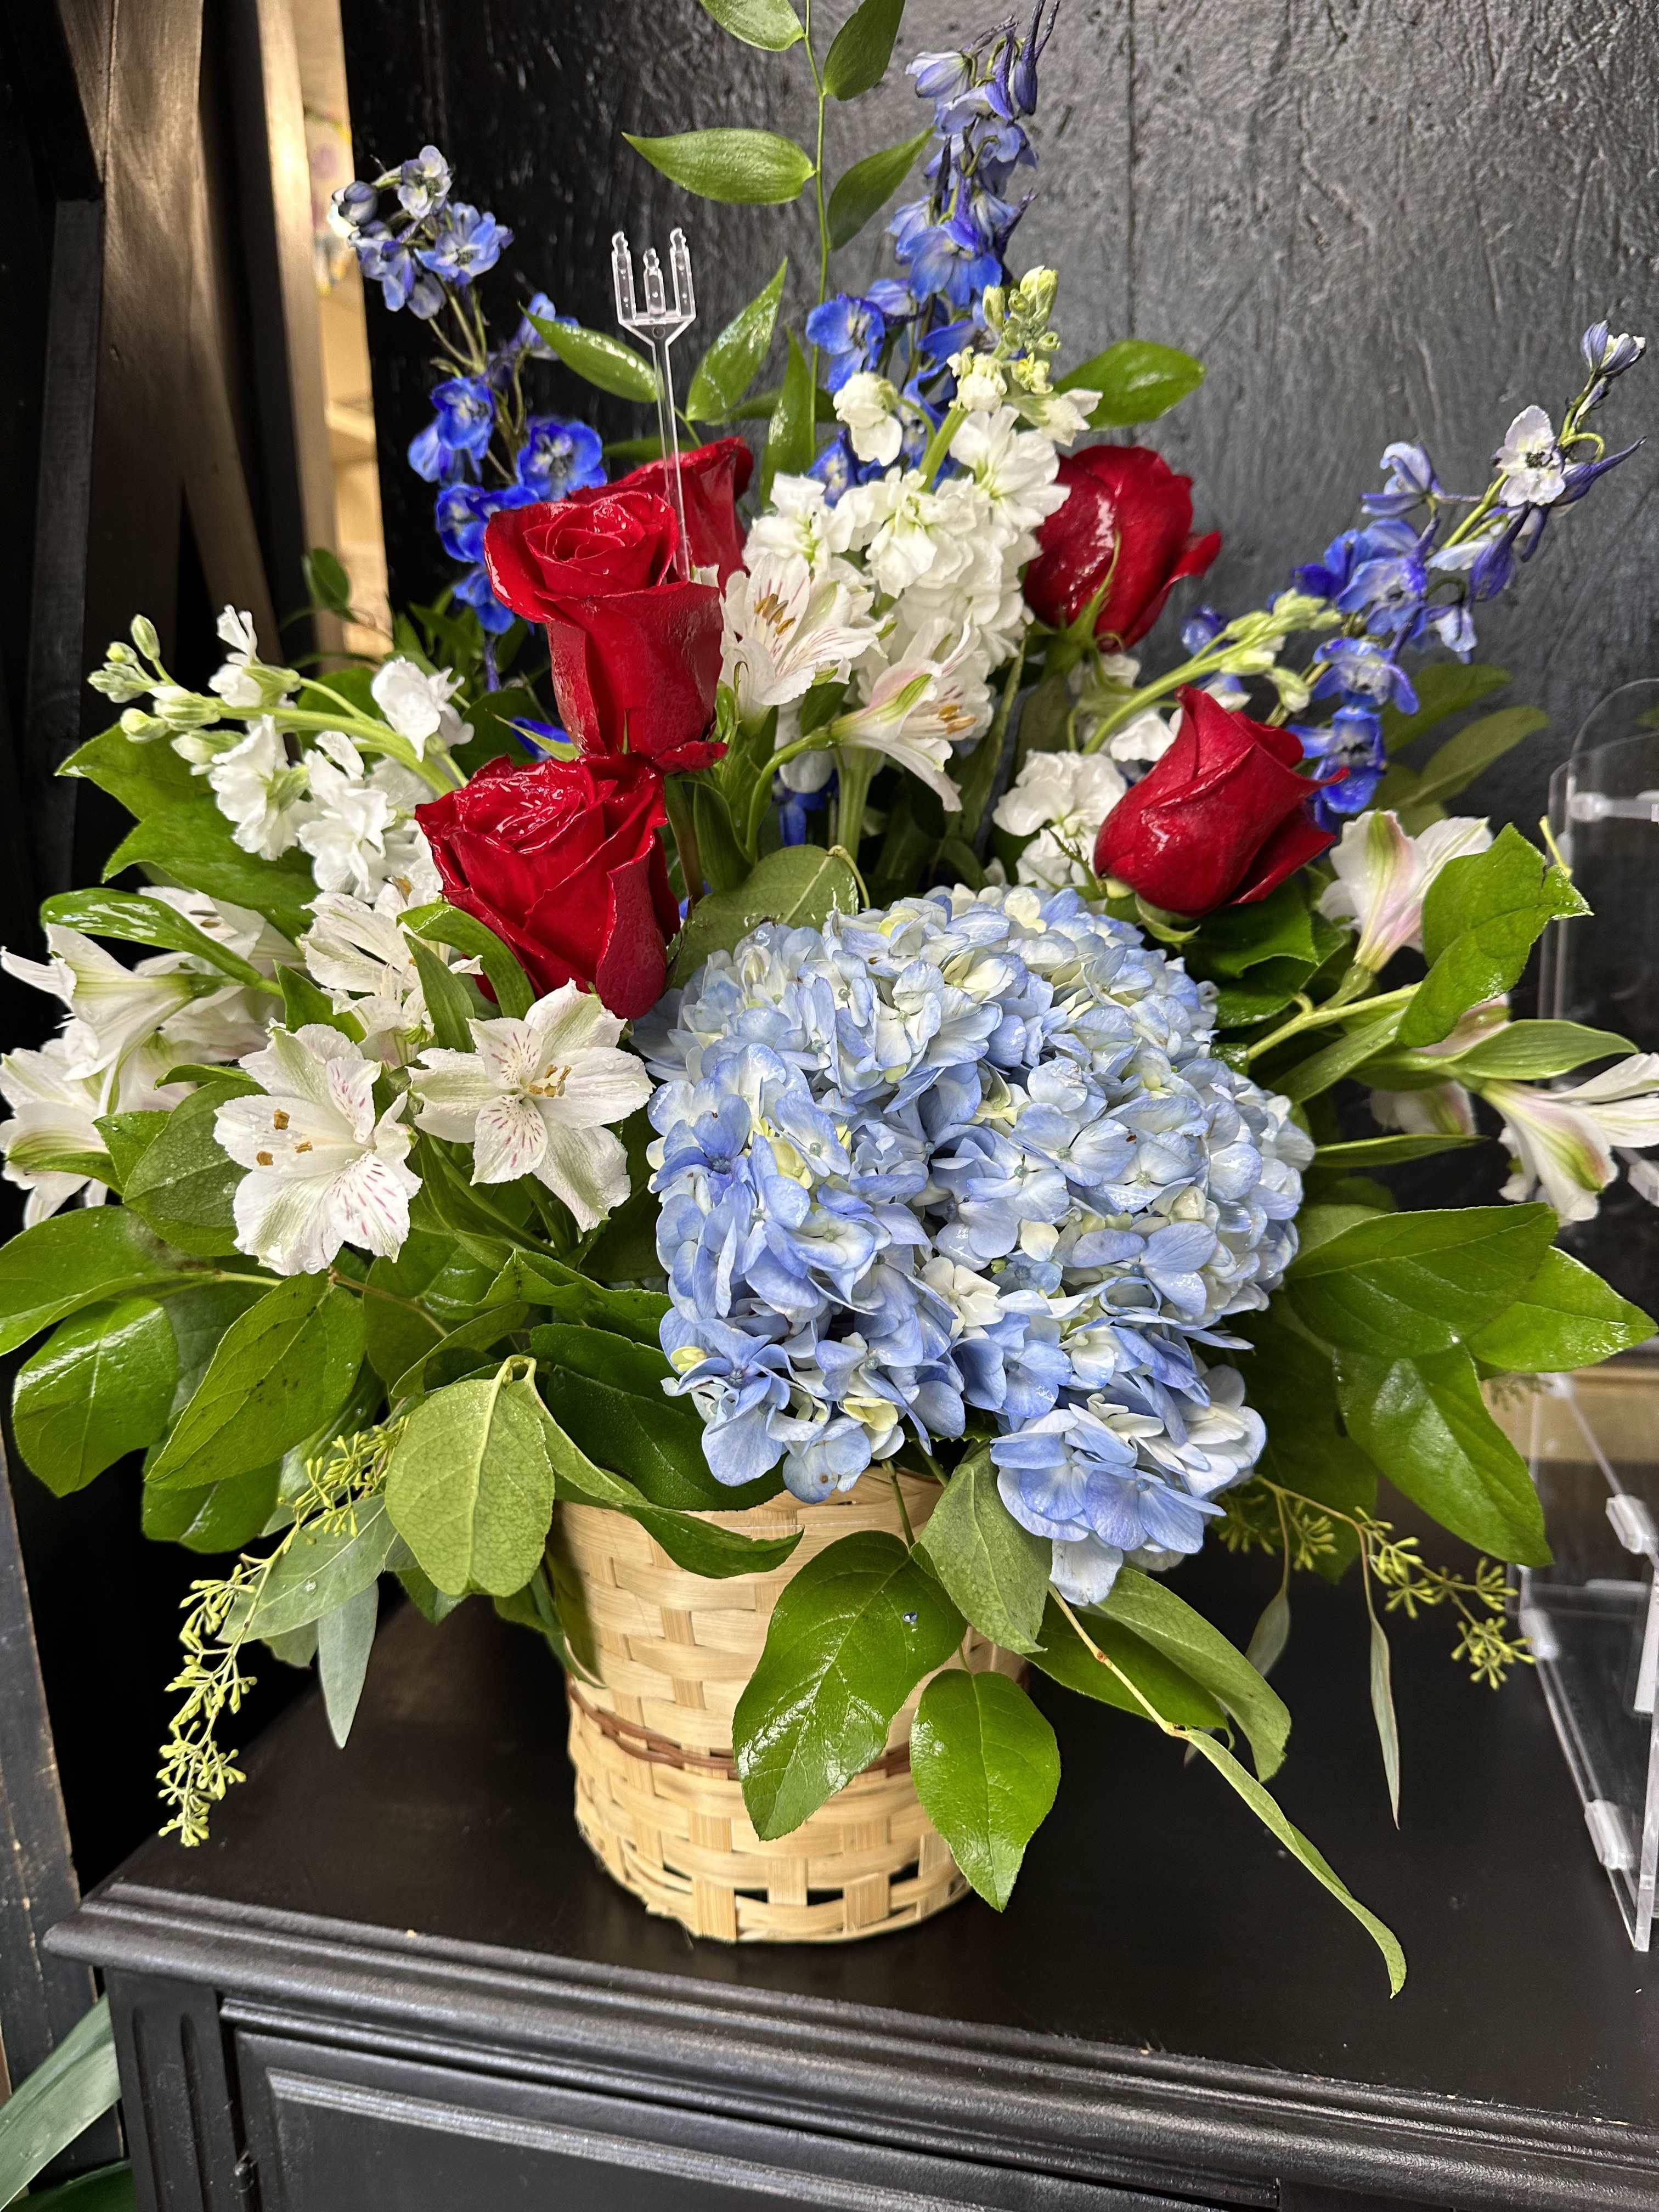 Forever Remembered  - A red, white, and blue tribute funeral basket featuring red roses, , blue delphinium, and white stock. Fitting for any type of funeral ceremony.